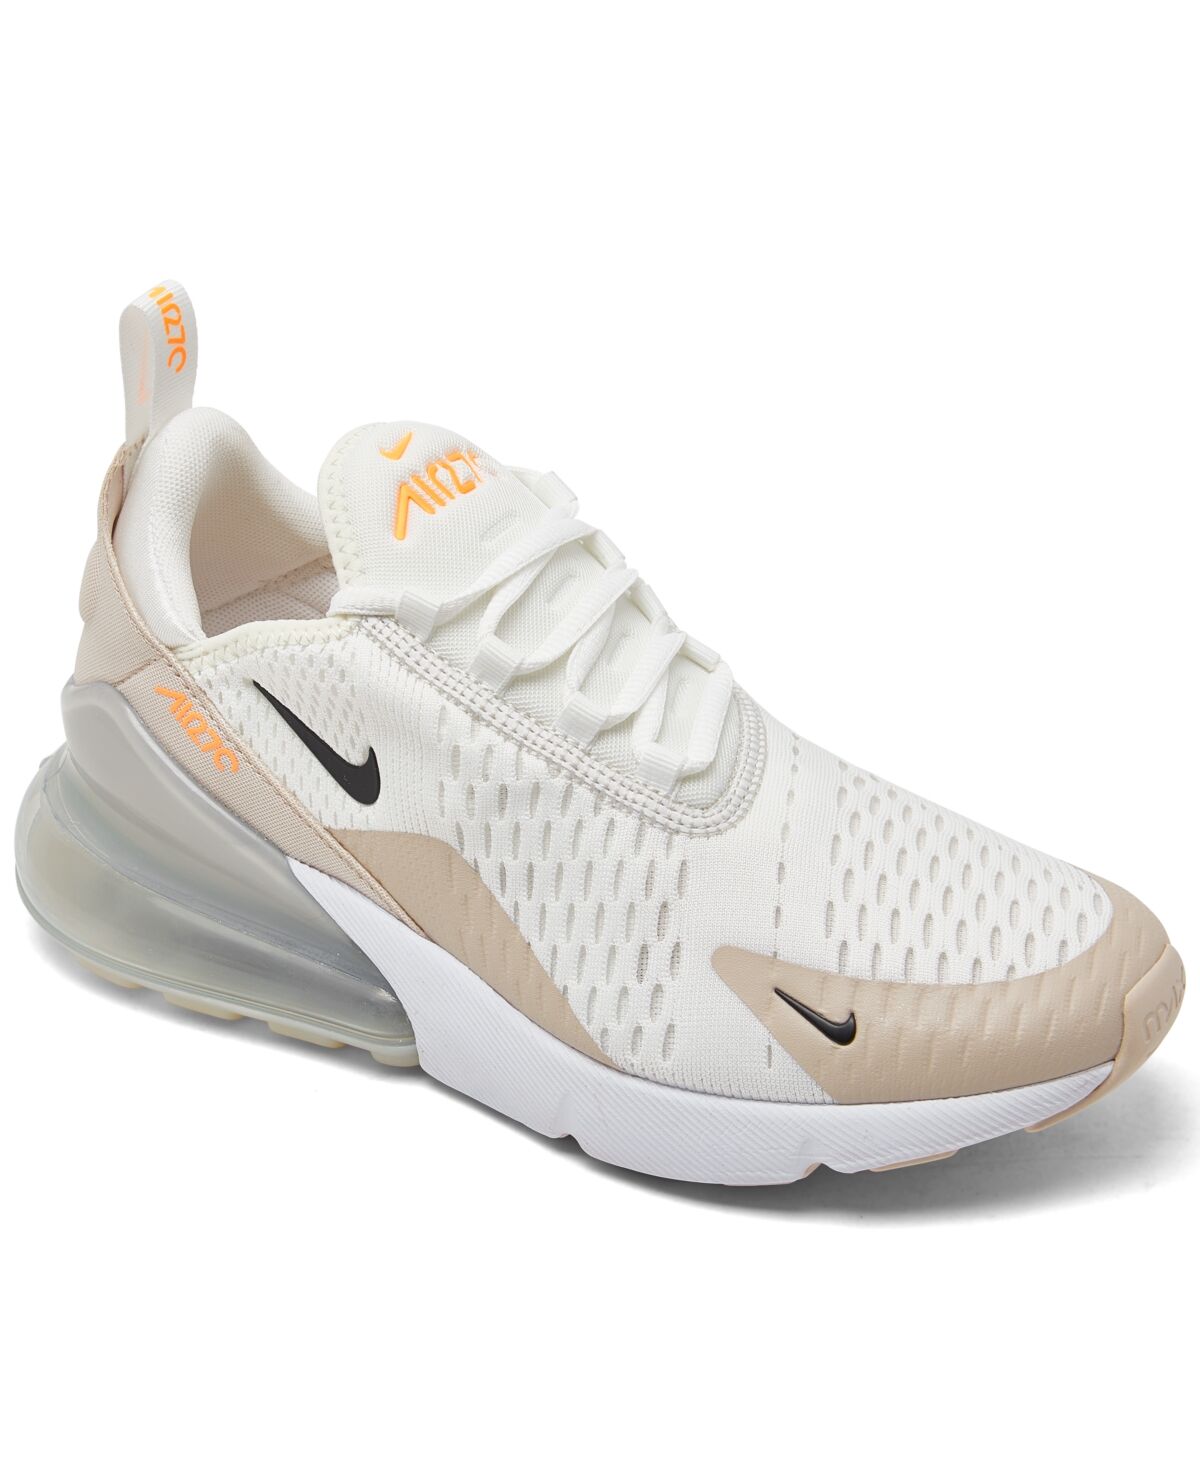 Nike Women's Air Max 270 Casual Sneakers from Finish Line - Summit White, Desert Sand